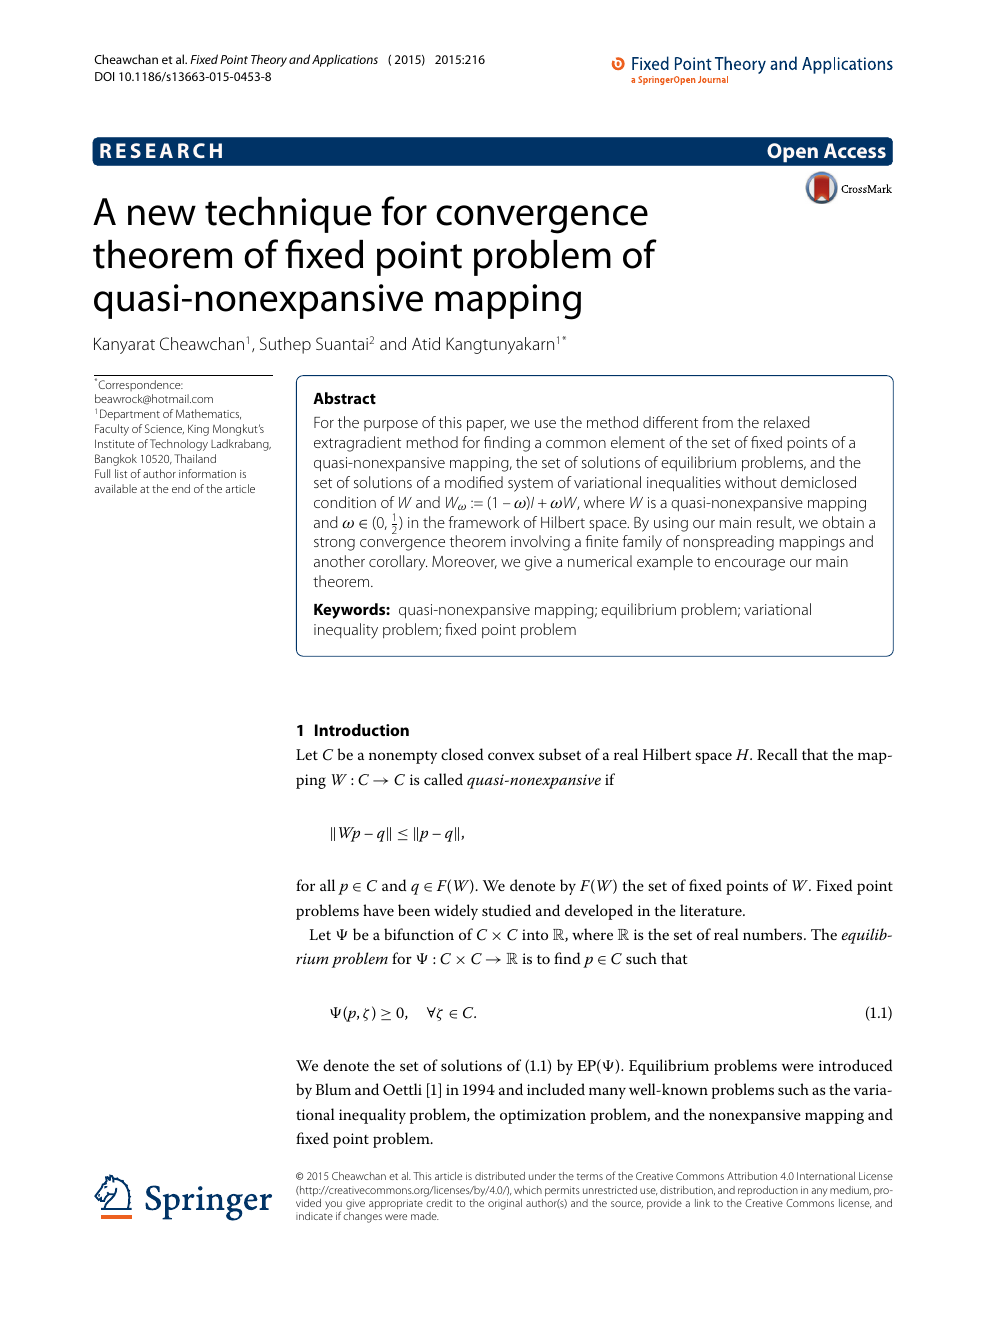 A New Technique For Convergence Theorem Of Fixed Point Problem Of Quasi Nonexpansive Mapping Topic Of Research Paper In Mathematics Download Scholarly Article Pdf And Read For Free On Cyberleninka Open Science